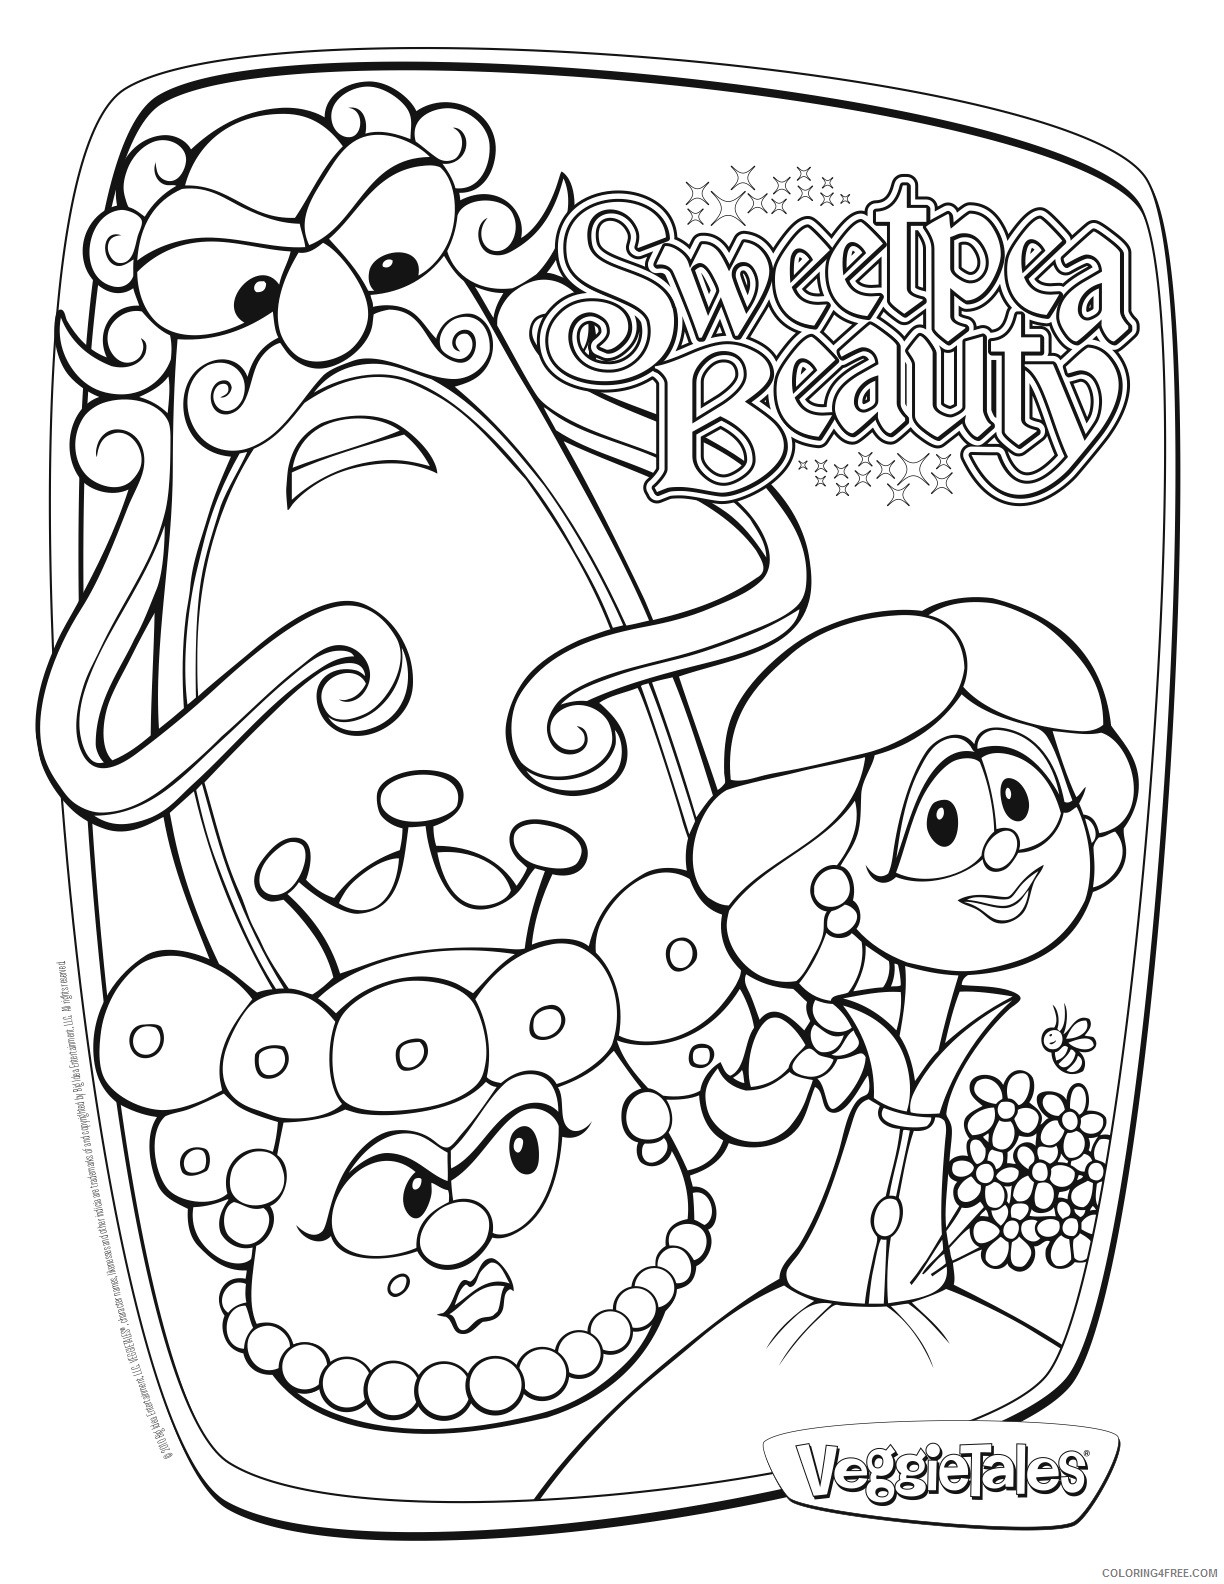 veggie tales coloring pages sweetpea beauty Coloring4free